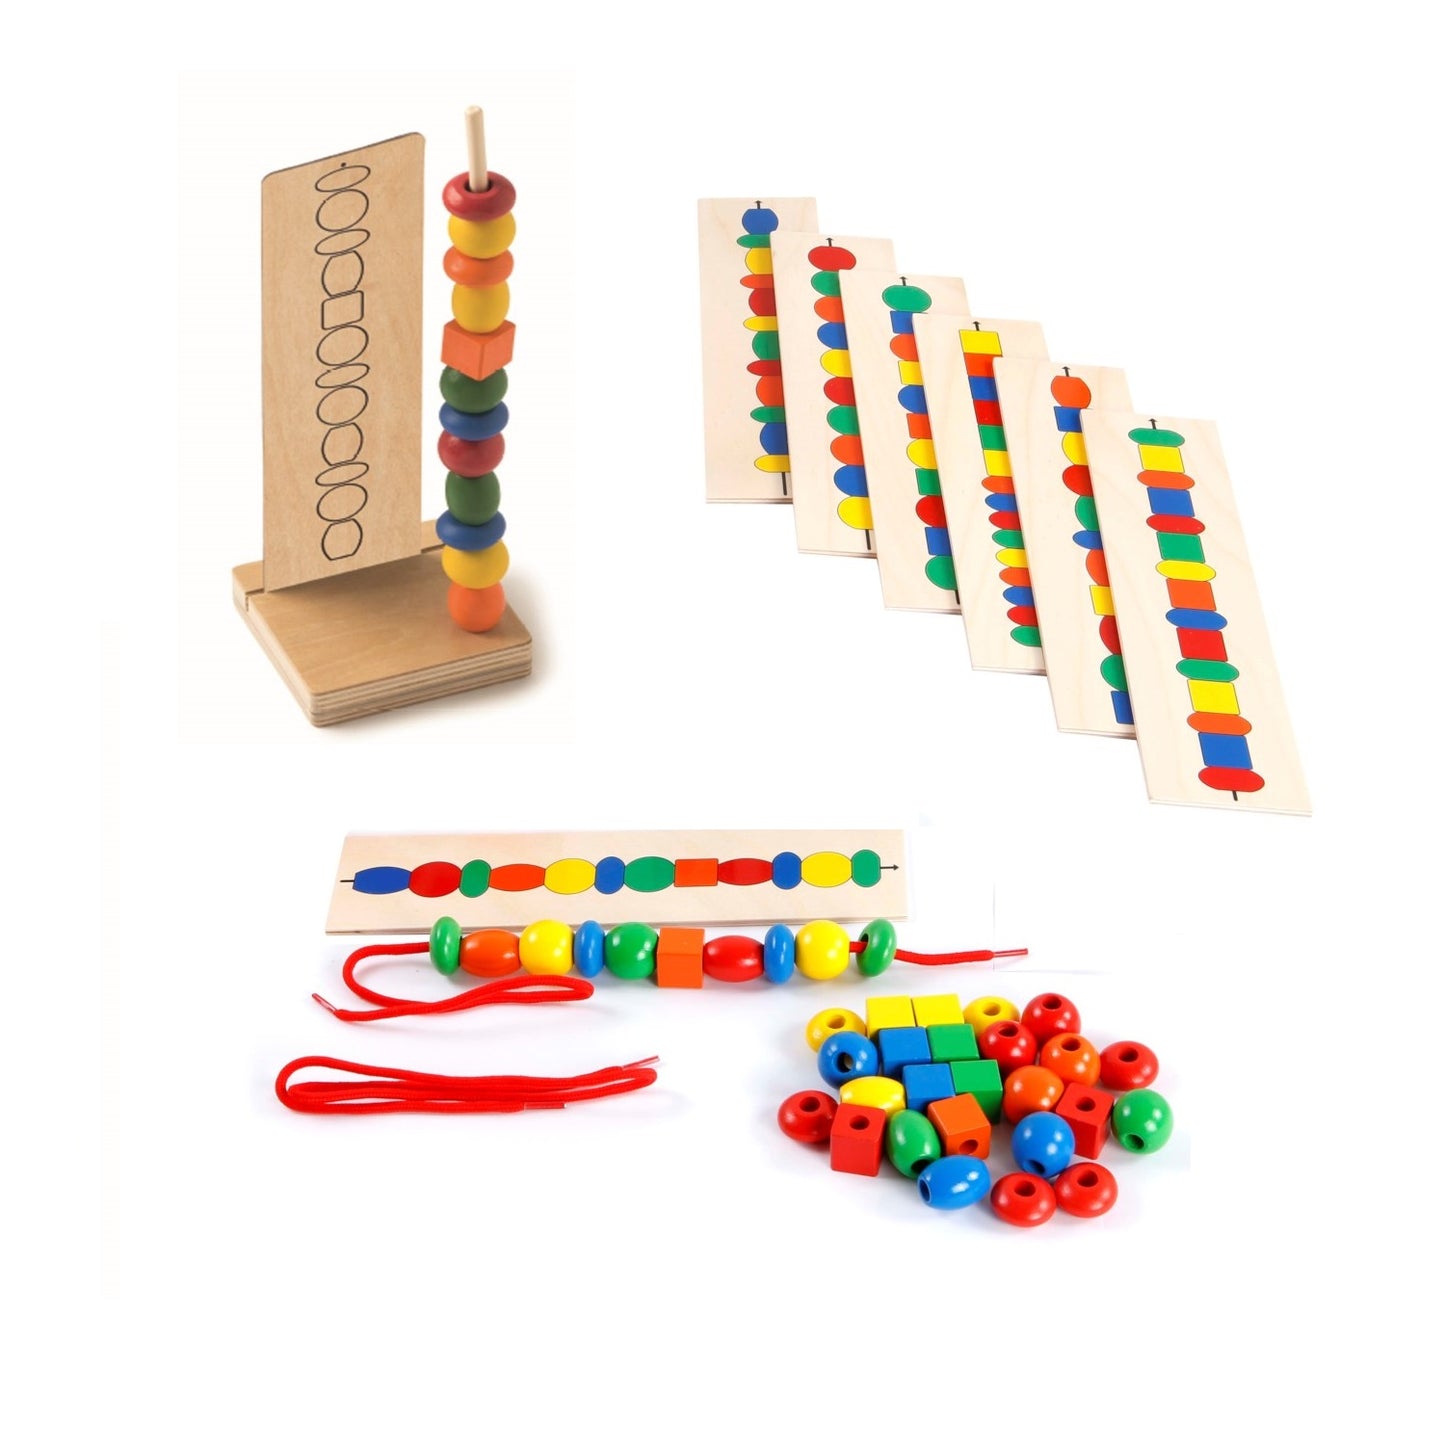 Toys for Life Sort The Beads Logic Lacing Game 邏輯串珠遊戲